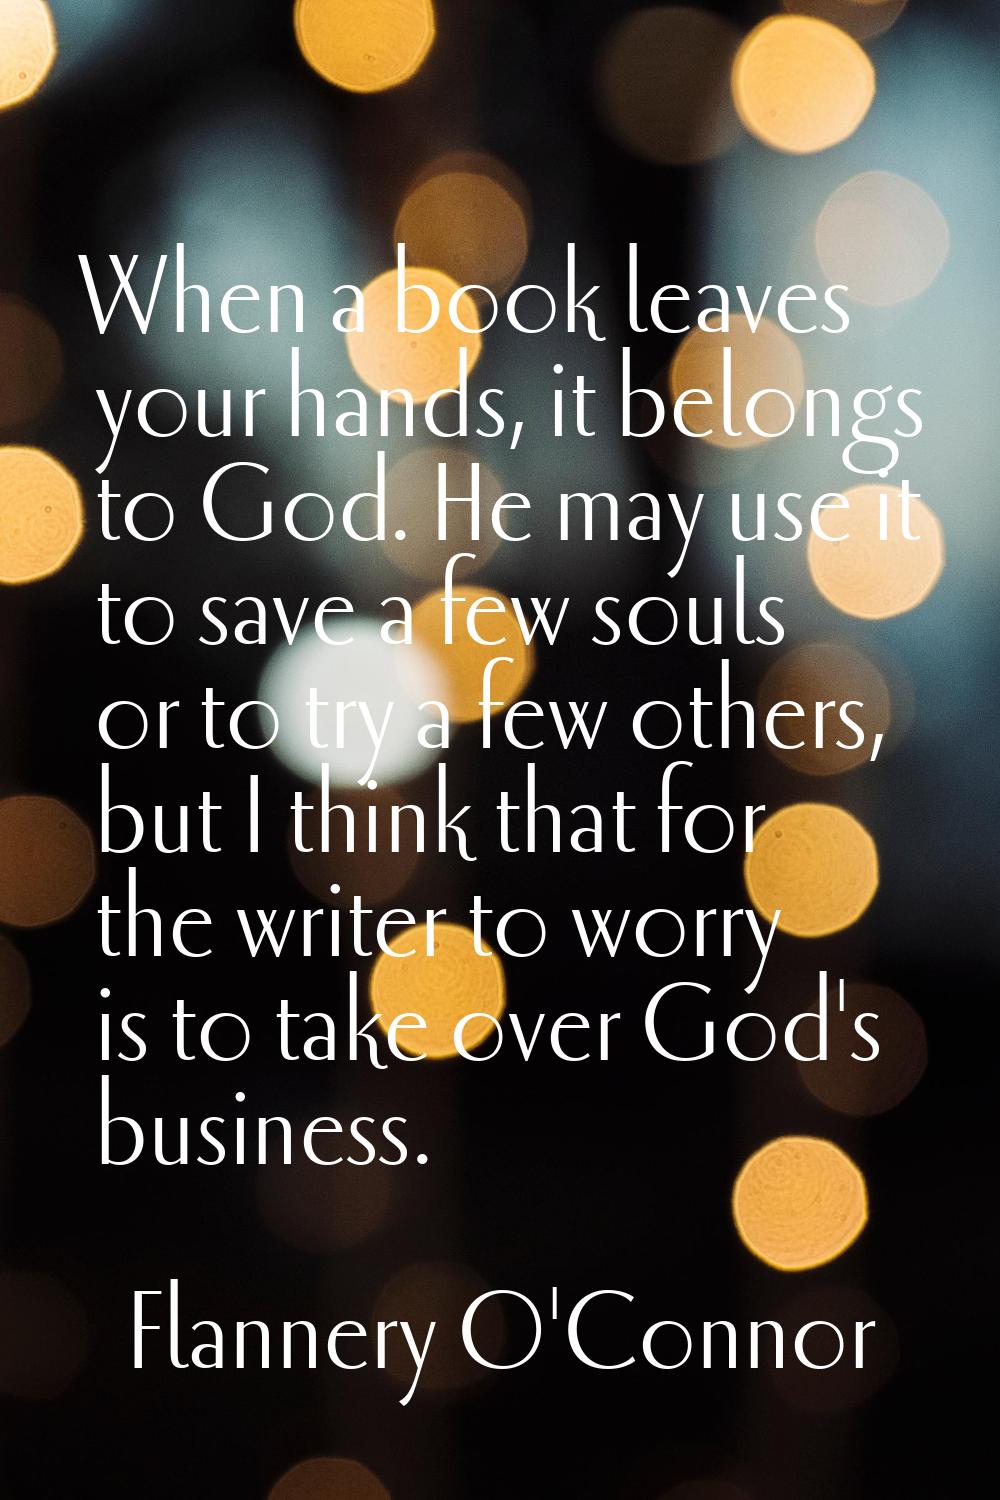 When a book leaves your hands, it belongs to God. He may use it to save a few souls or to try a few